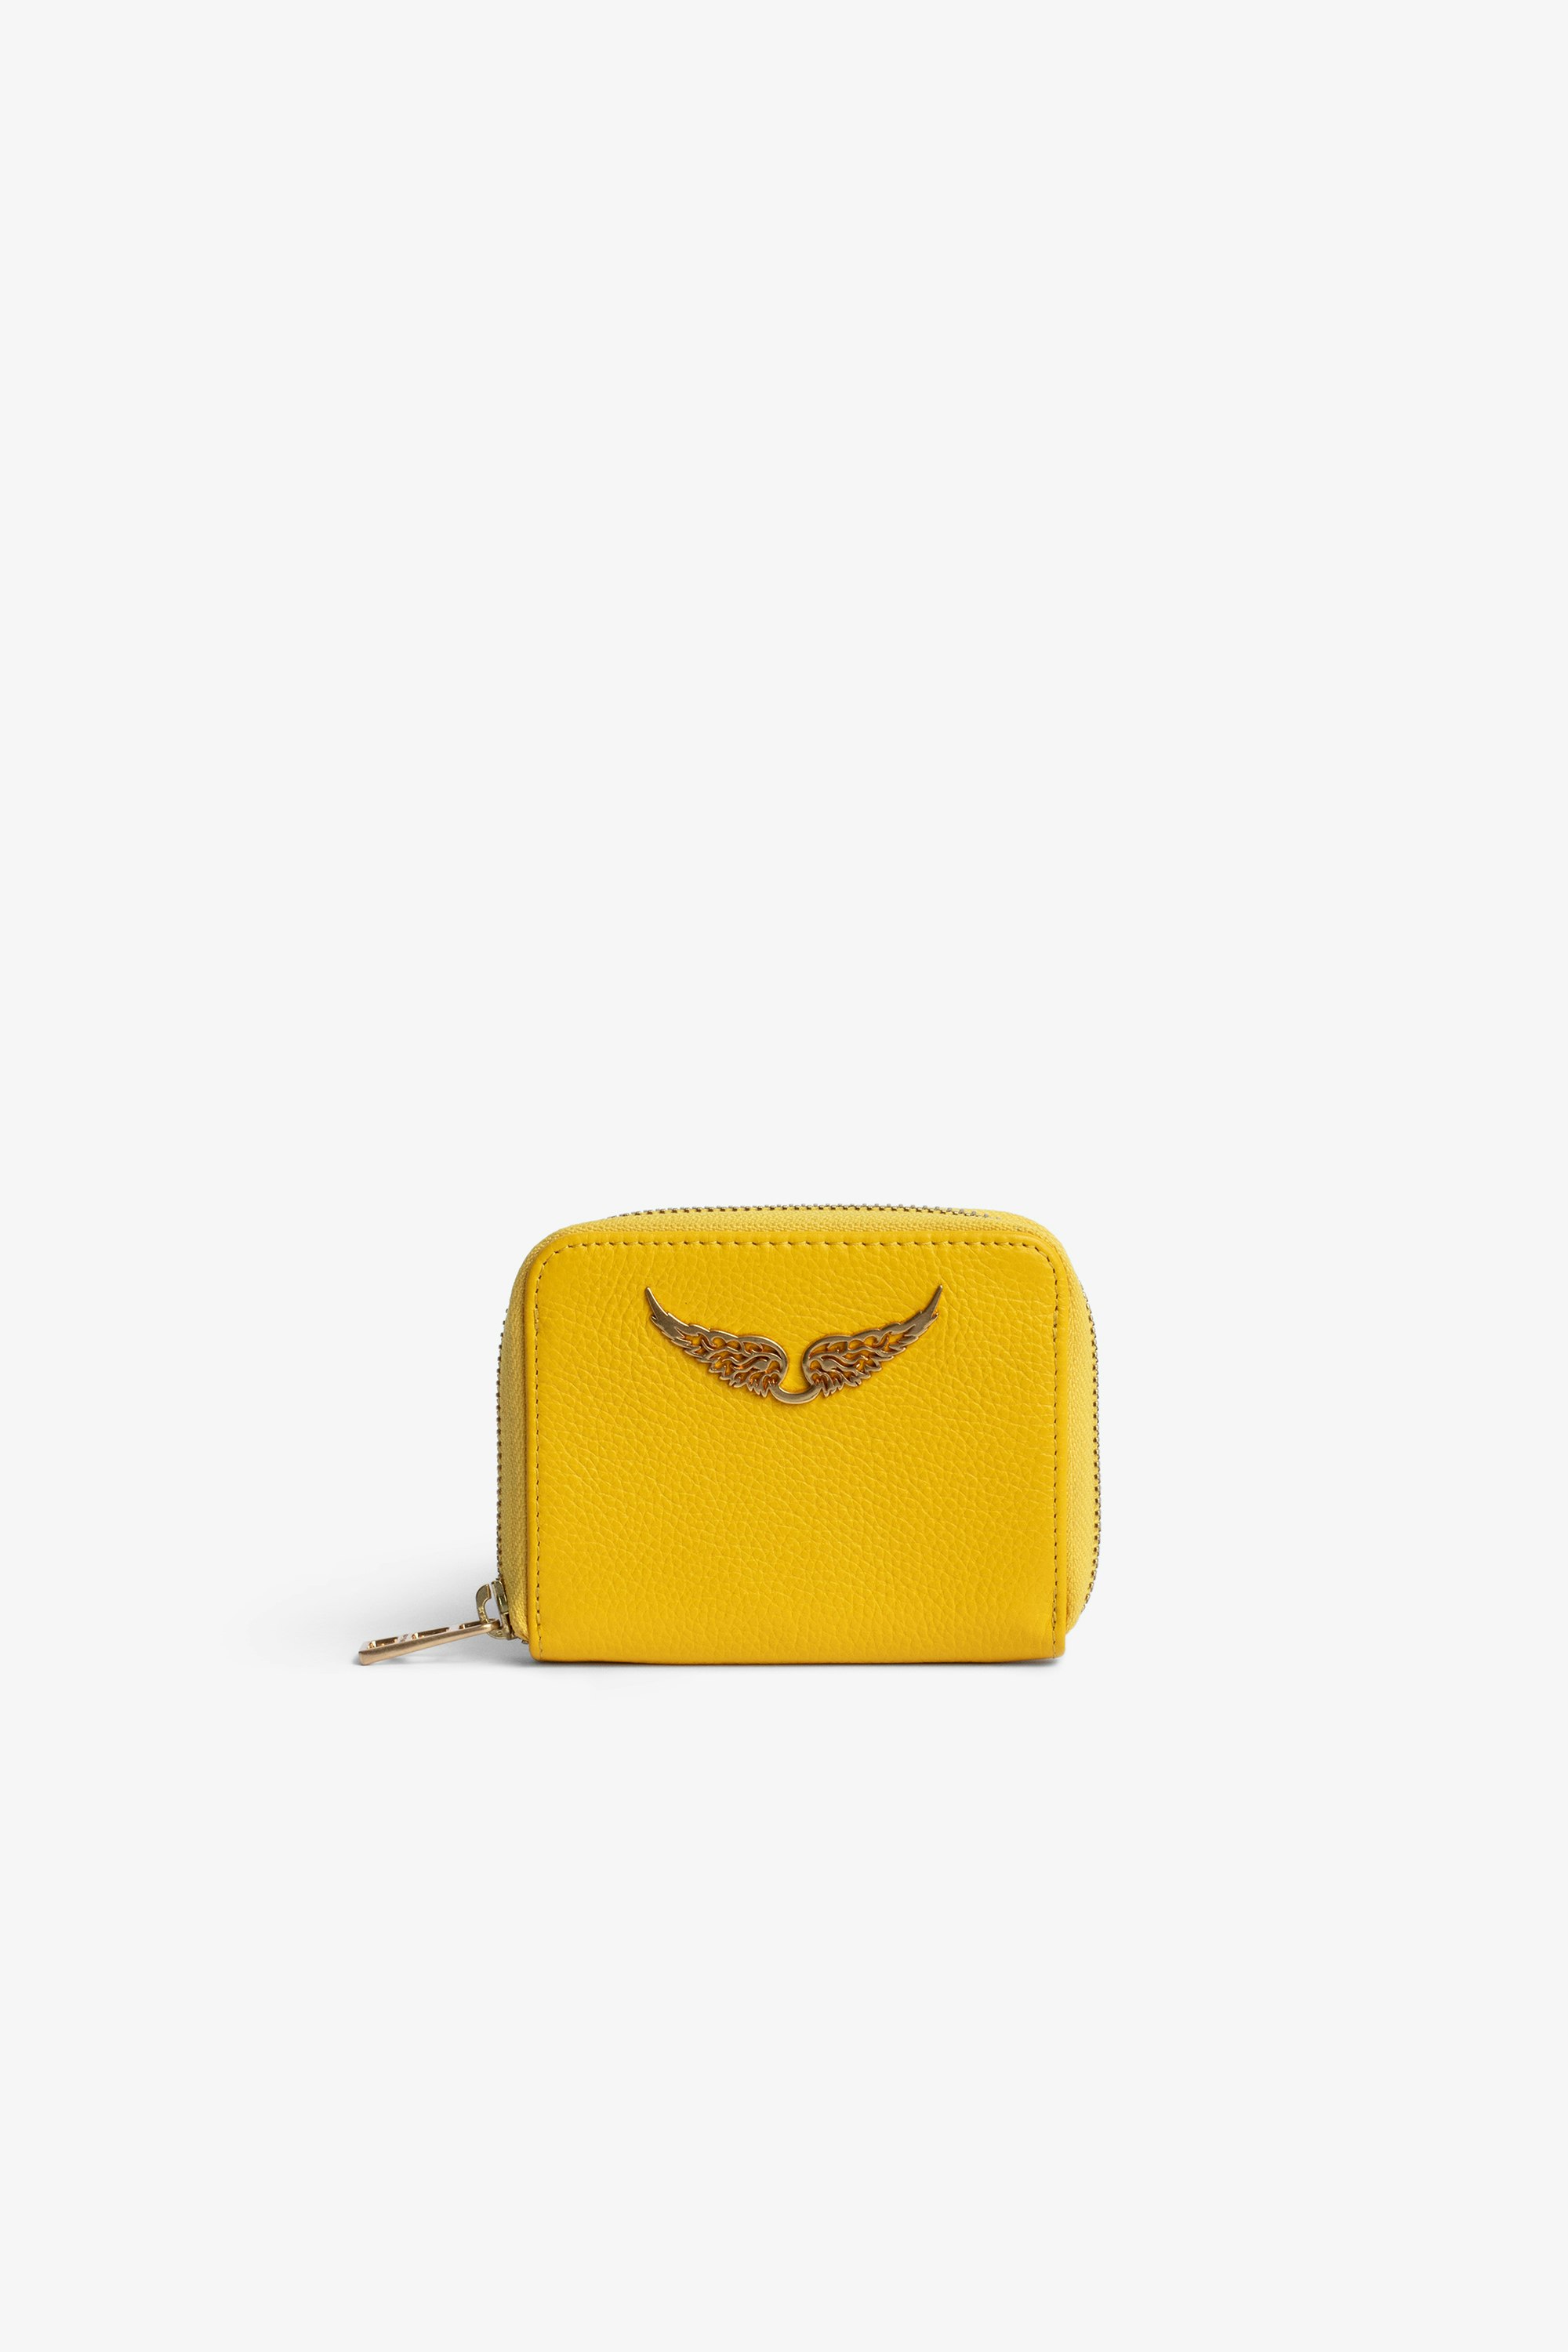 Mini ZV Coin Purse Women’s coin purse in yellow grained leather